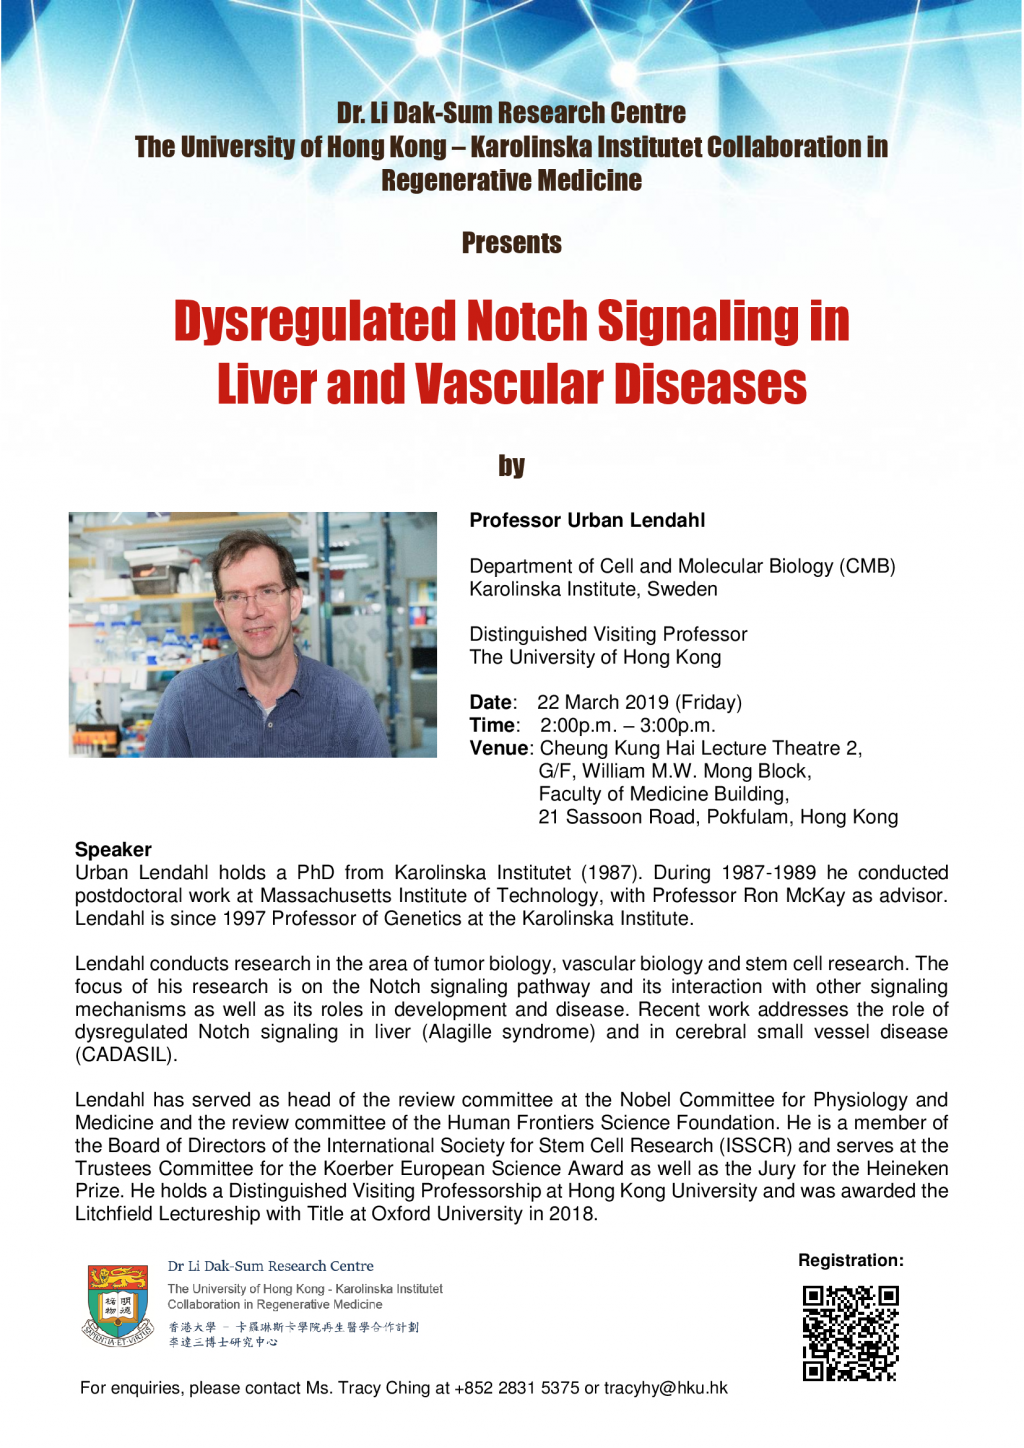 [Lecture] Dysregulated Notch Signaling in Liver and Vascular Diseases by Professor Urban Lendahl